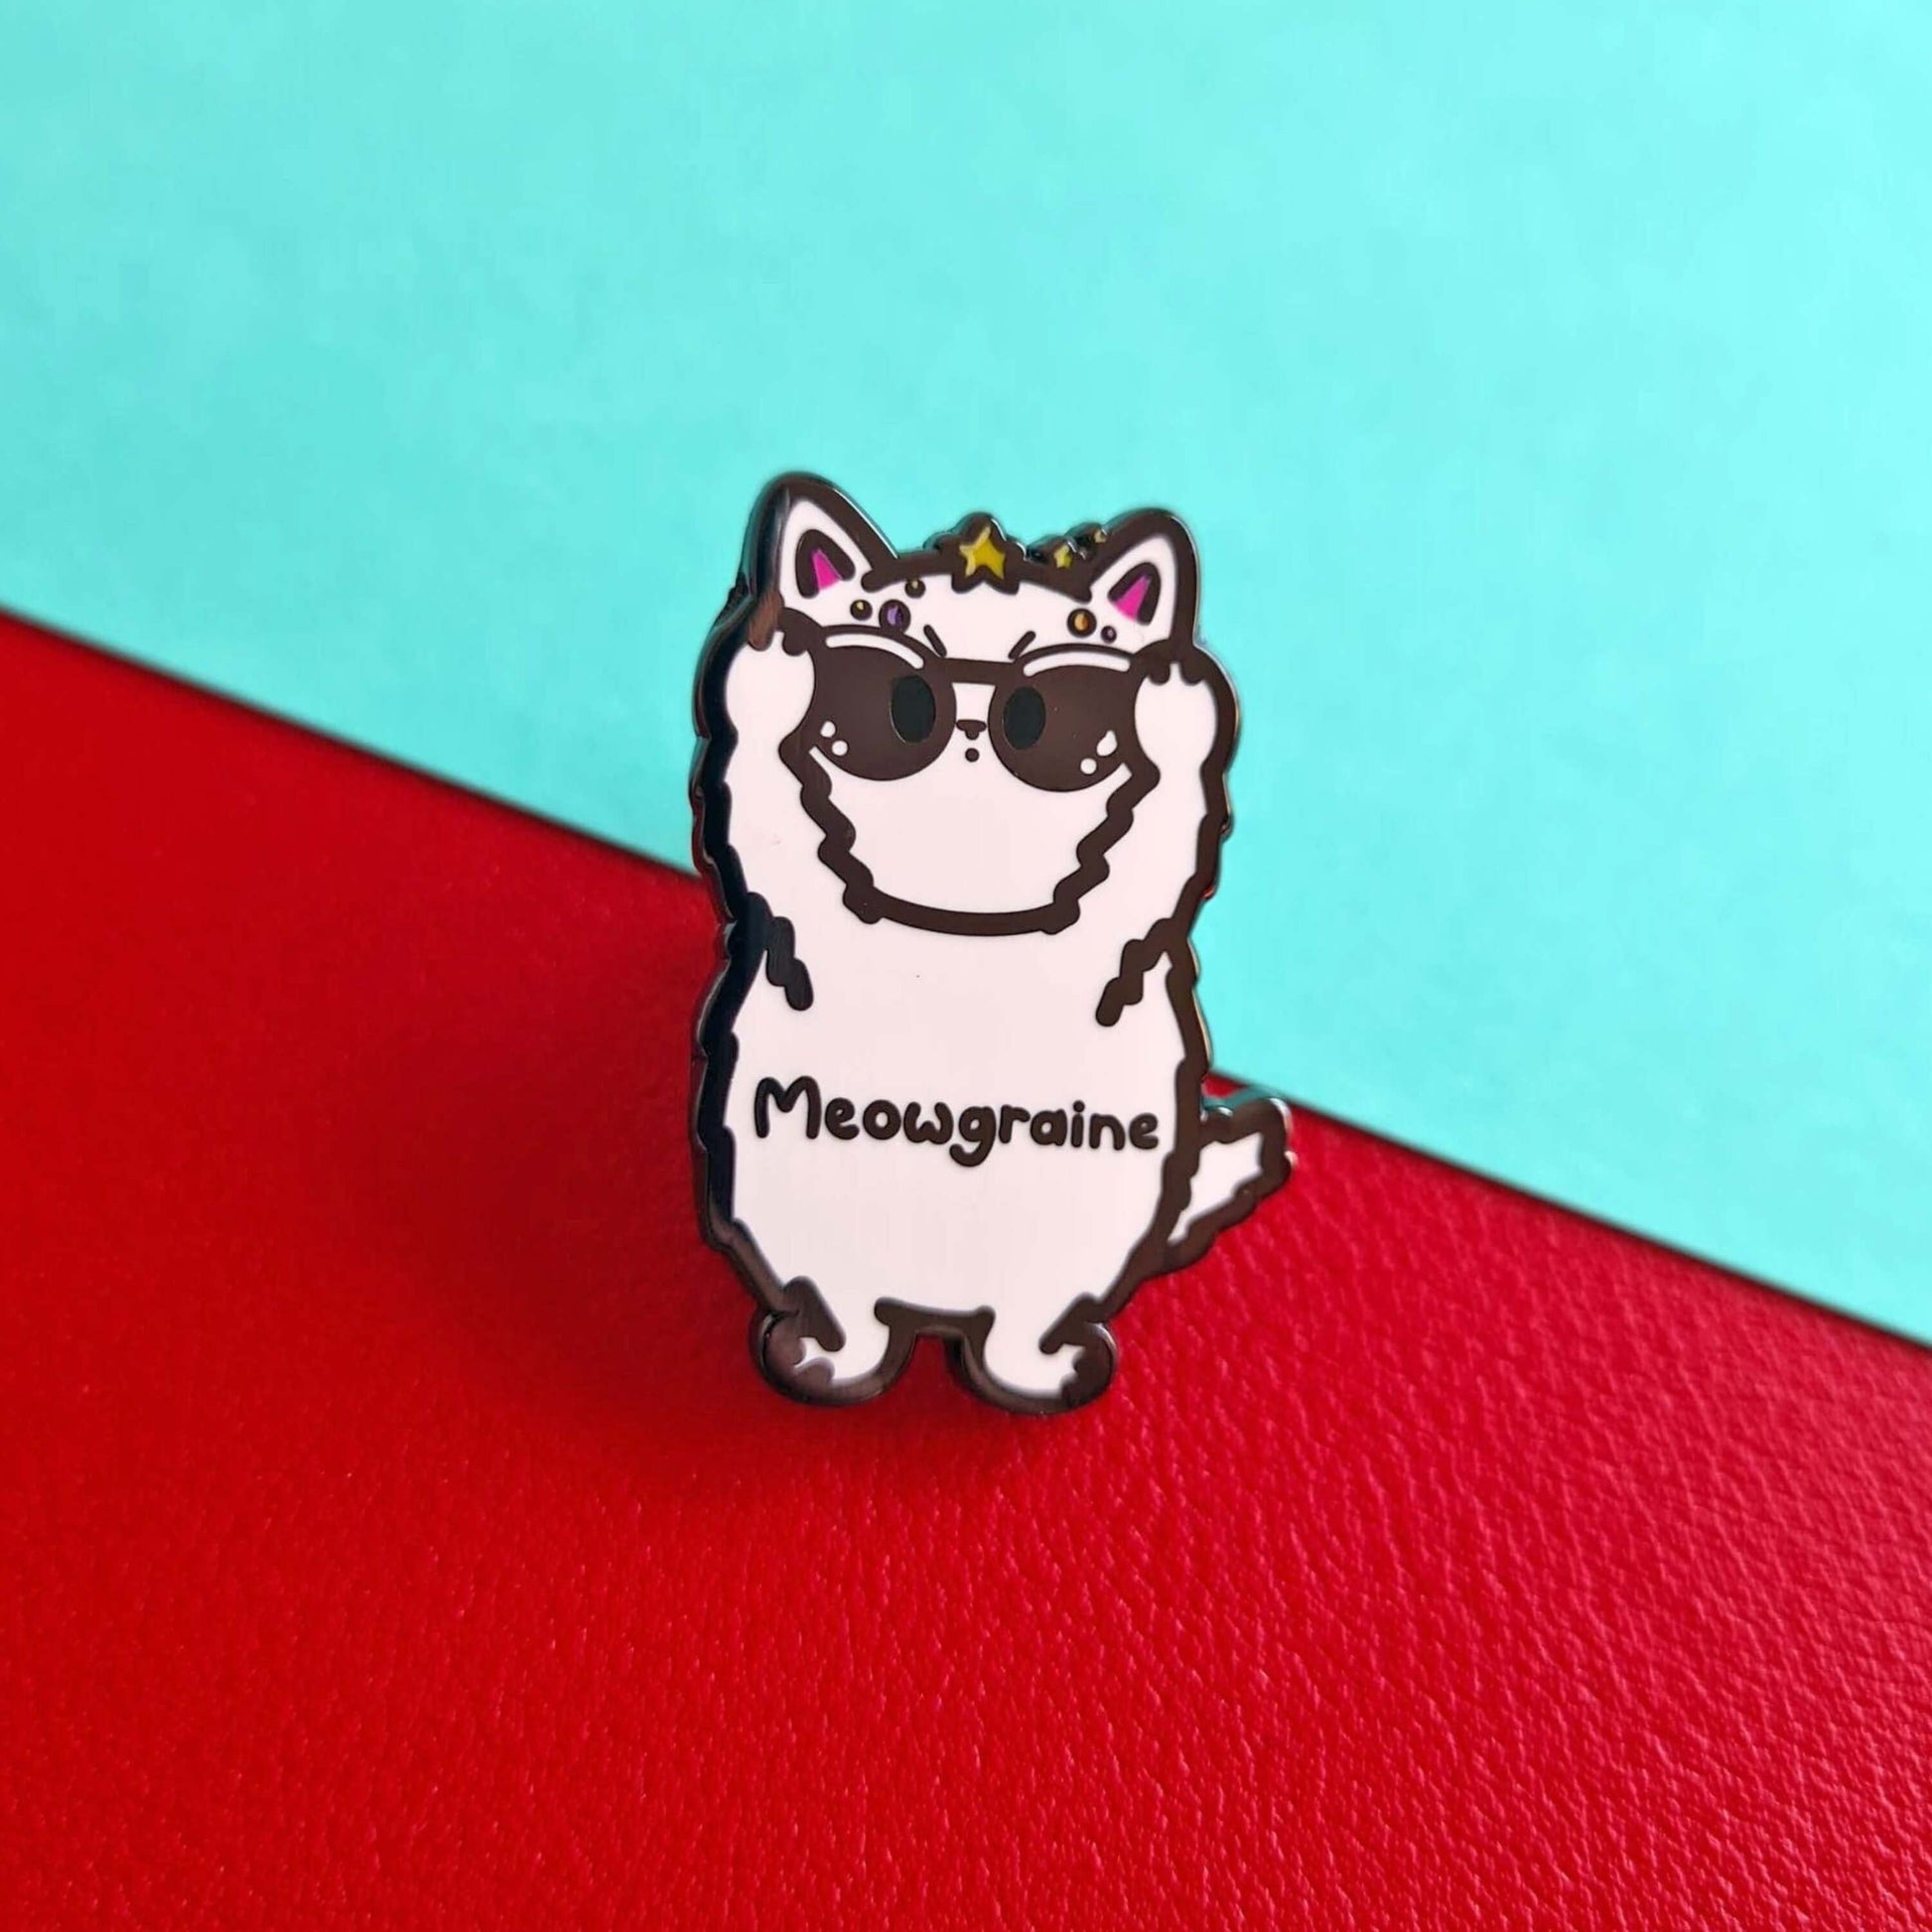 The Meowgraine Cat Enamel Pin - Migraine on a red and blue background. A white stressed cat clutching a pair of black sunglasses to its eyes with multicoloured spots and stars over its head, across its middle reads 'meowgraine'. The hand drawn design is raising awareness for migraines and headaches.